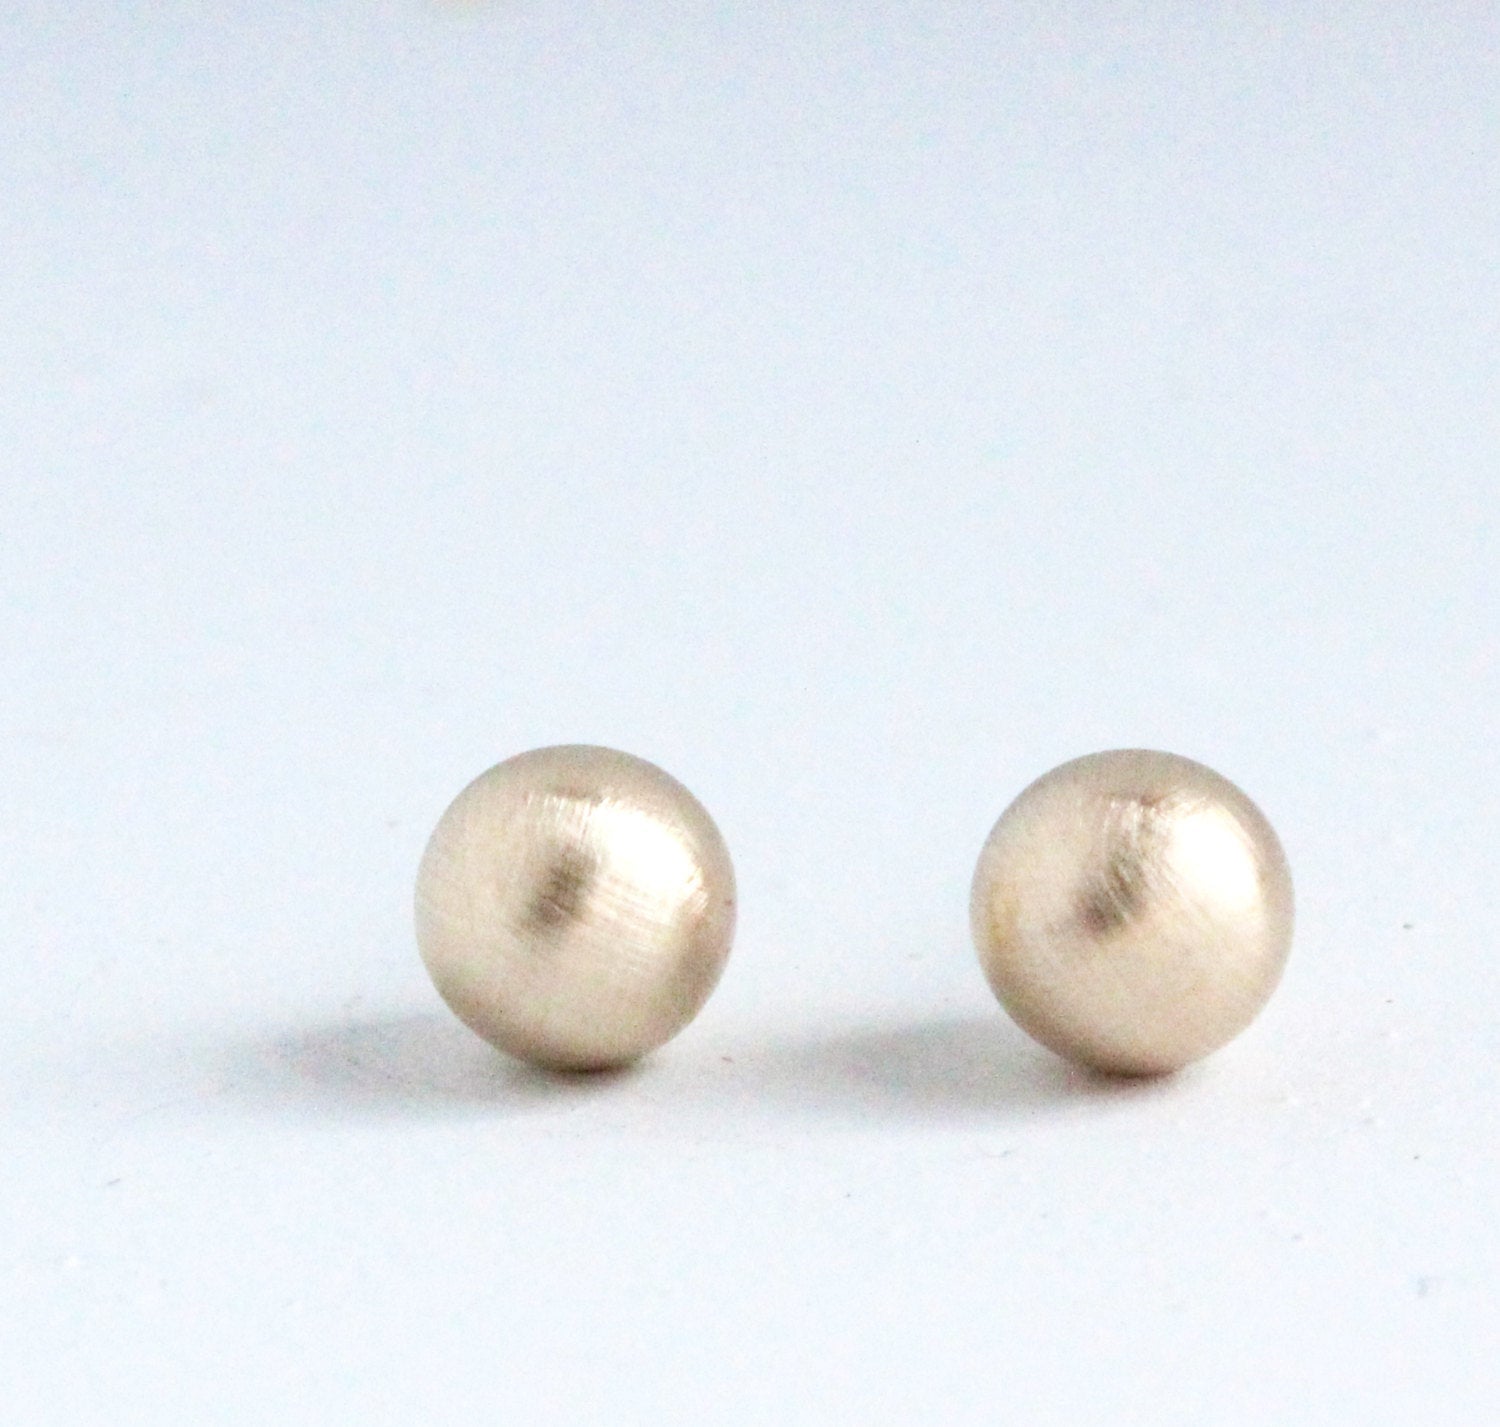 HLWD Gold IP 316L Stainless Steel Ball Stud Earrings 3mm India | Ubuy